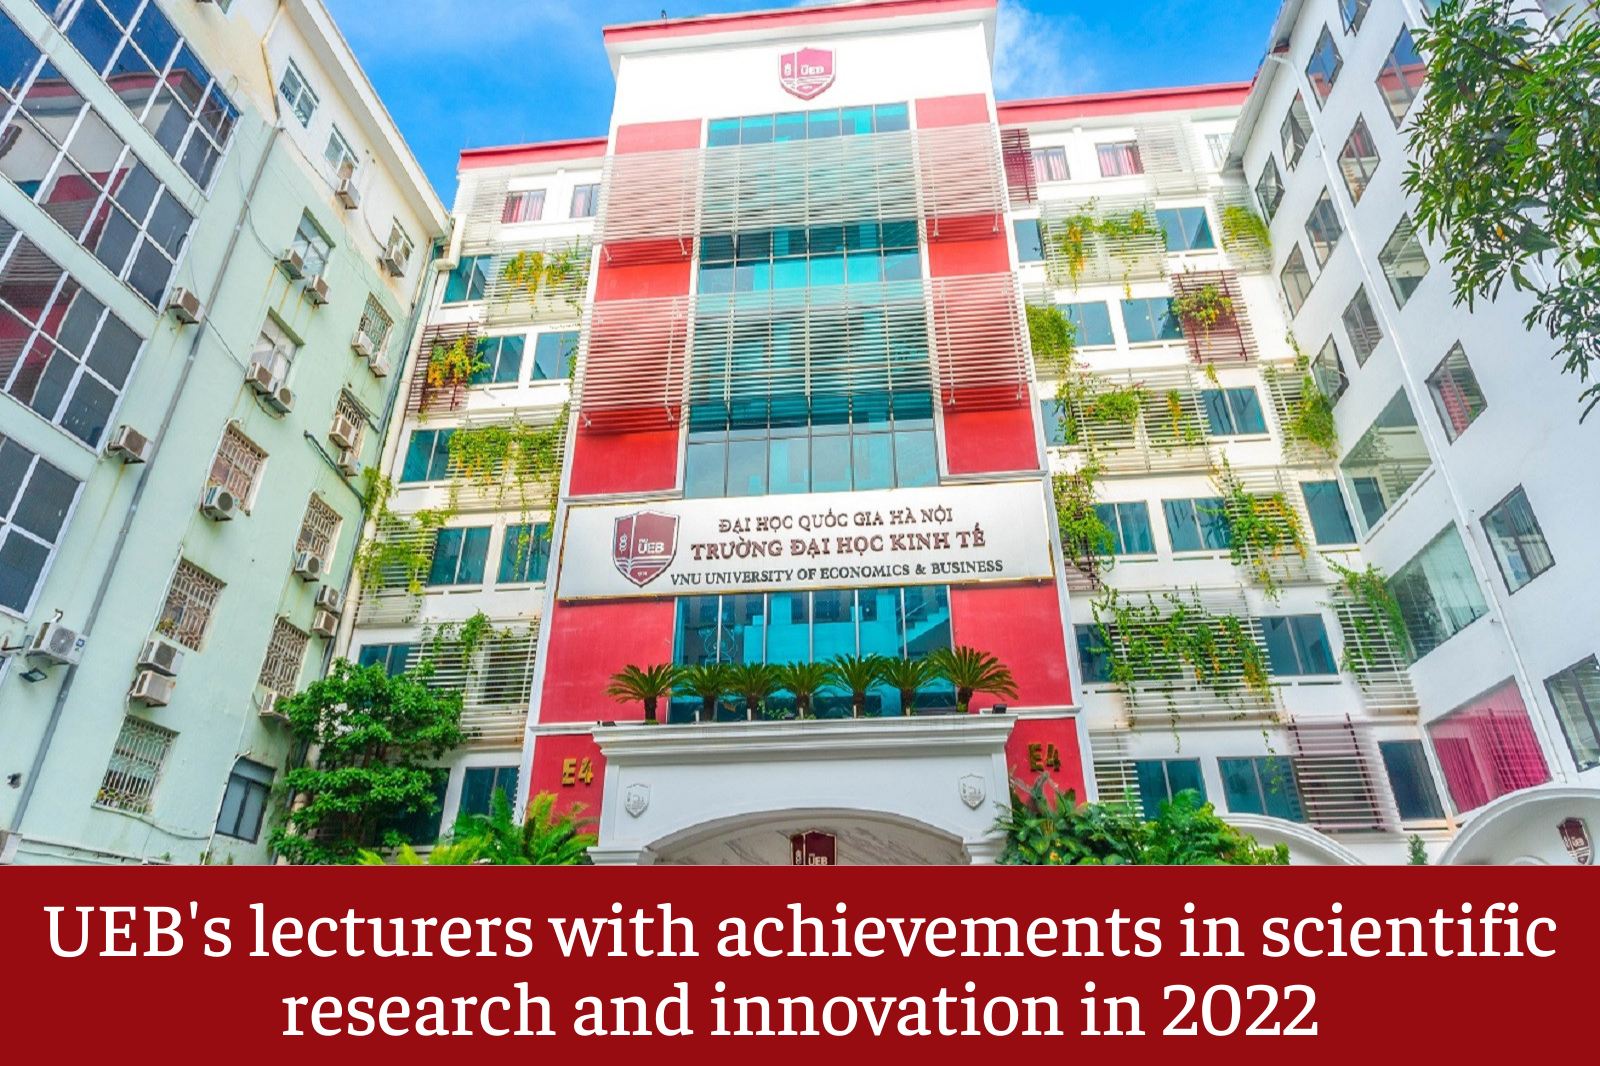 UEB's lecturers with achievements in scientific research and innovation in 2022